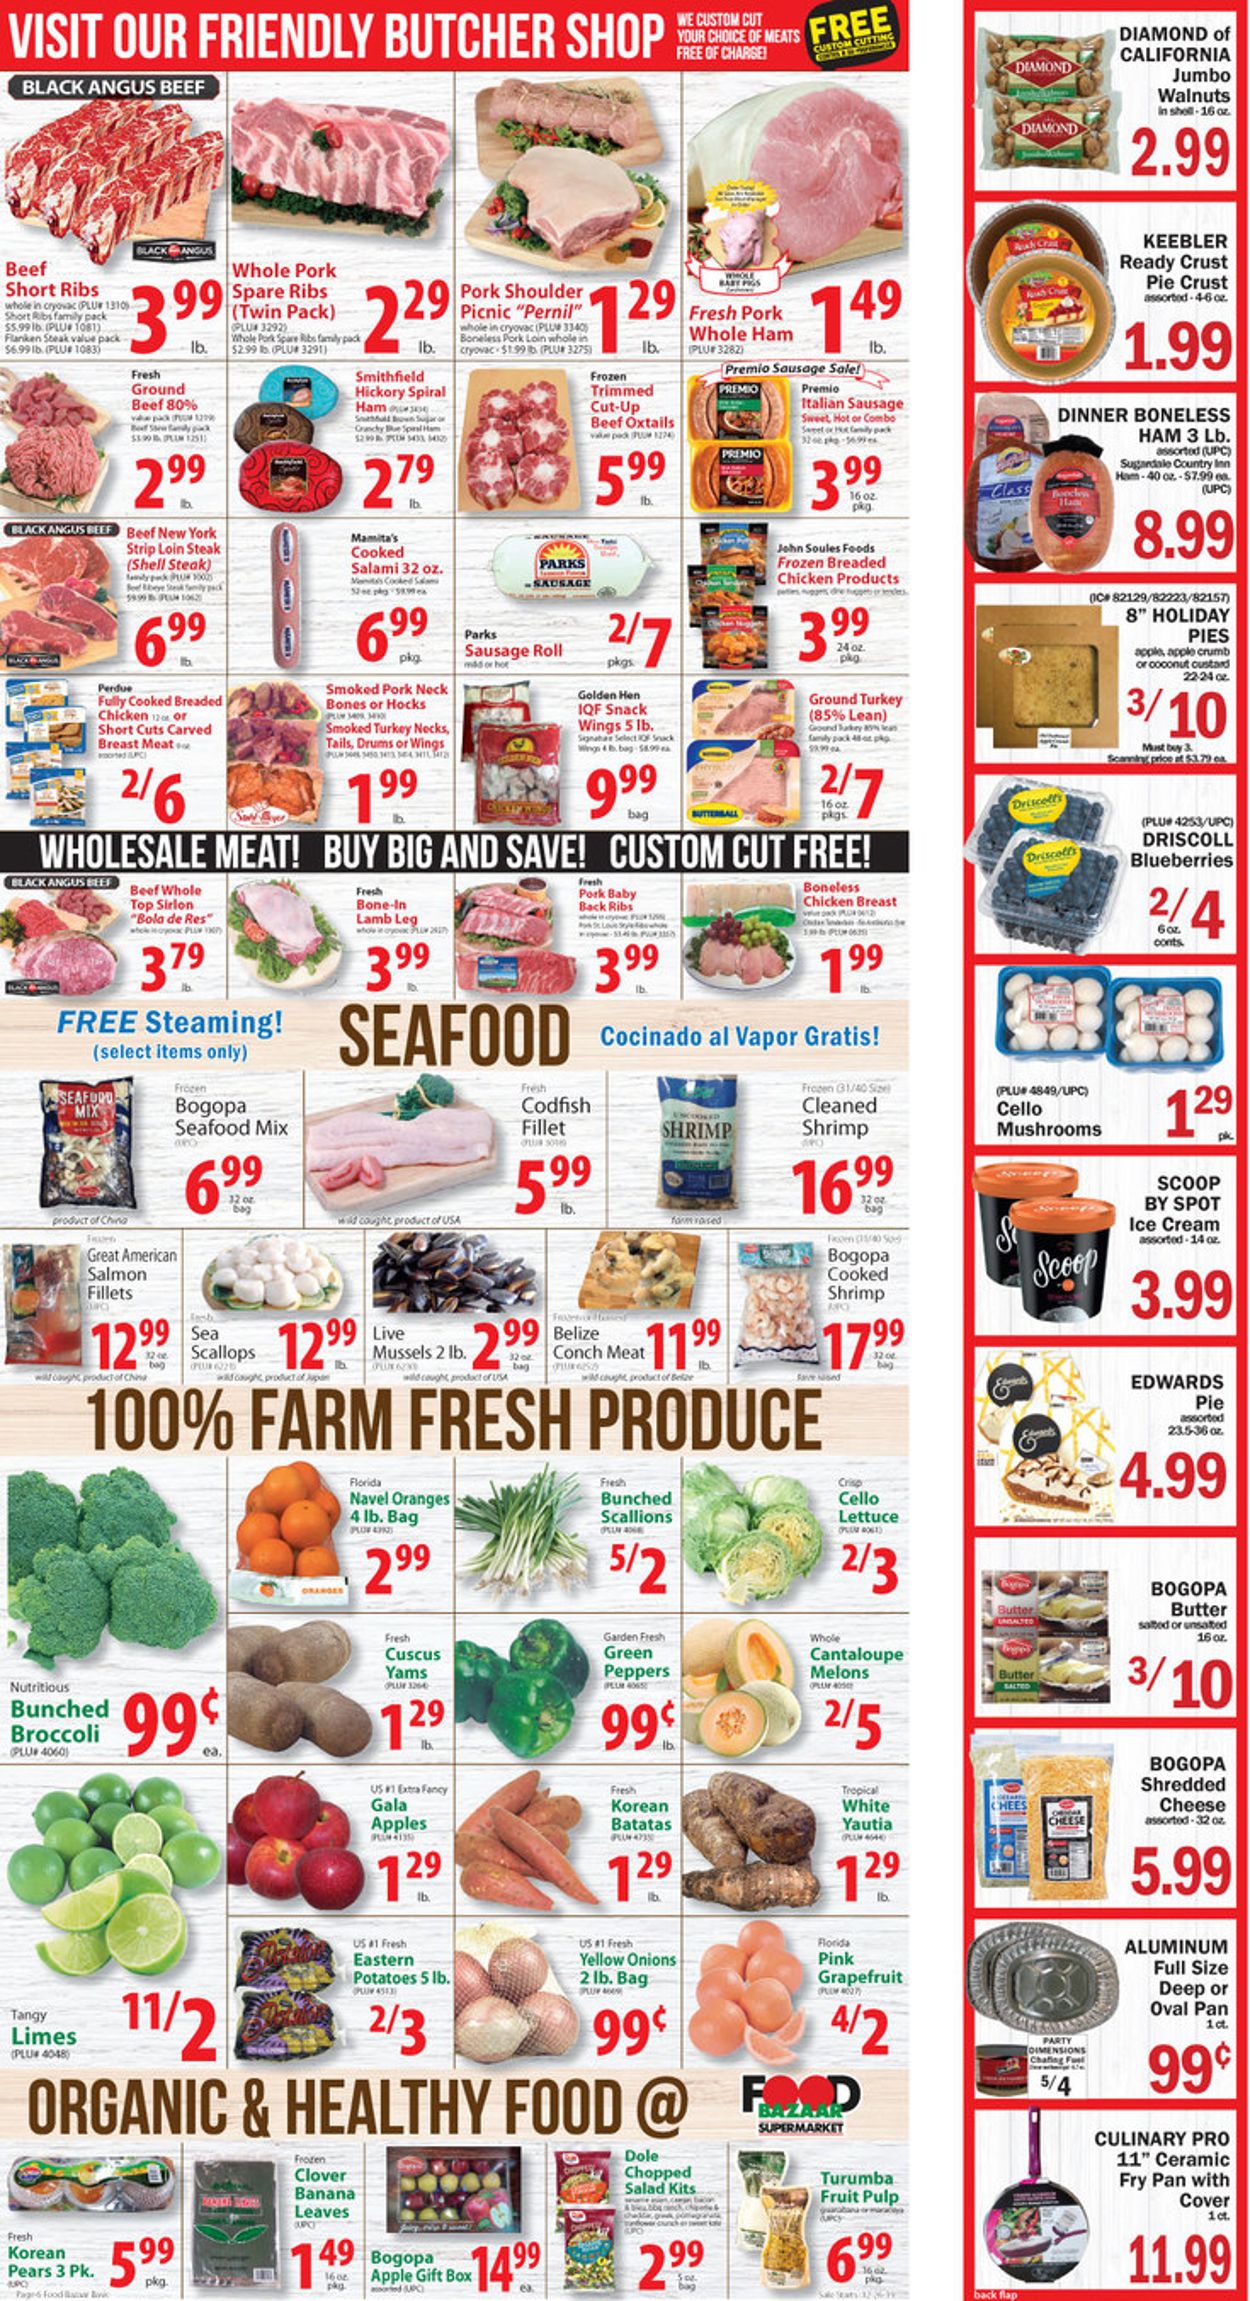 Catalogue Food Bazaar - New Year's Ad 2019/2020 from 12/26/2019